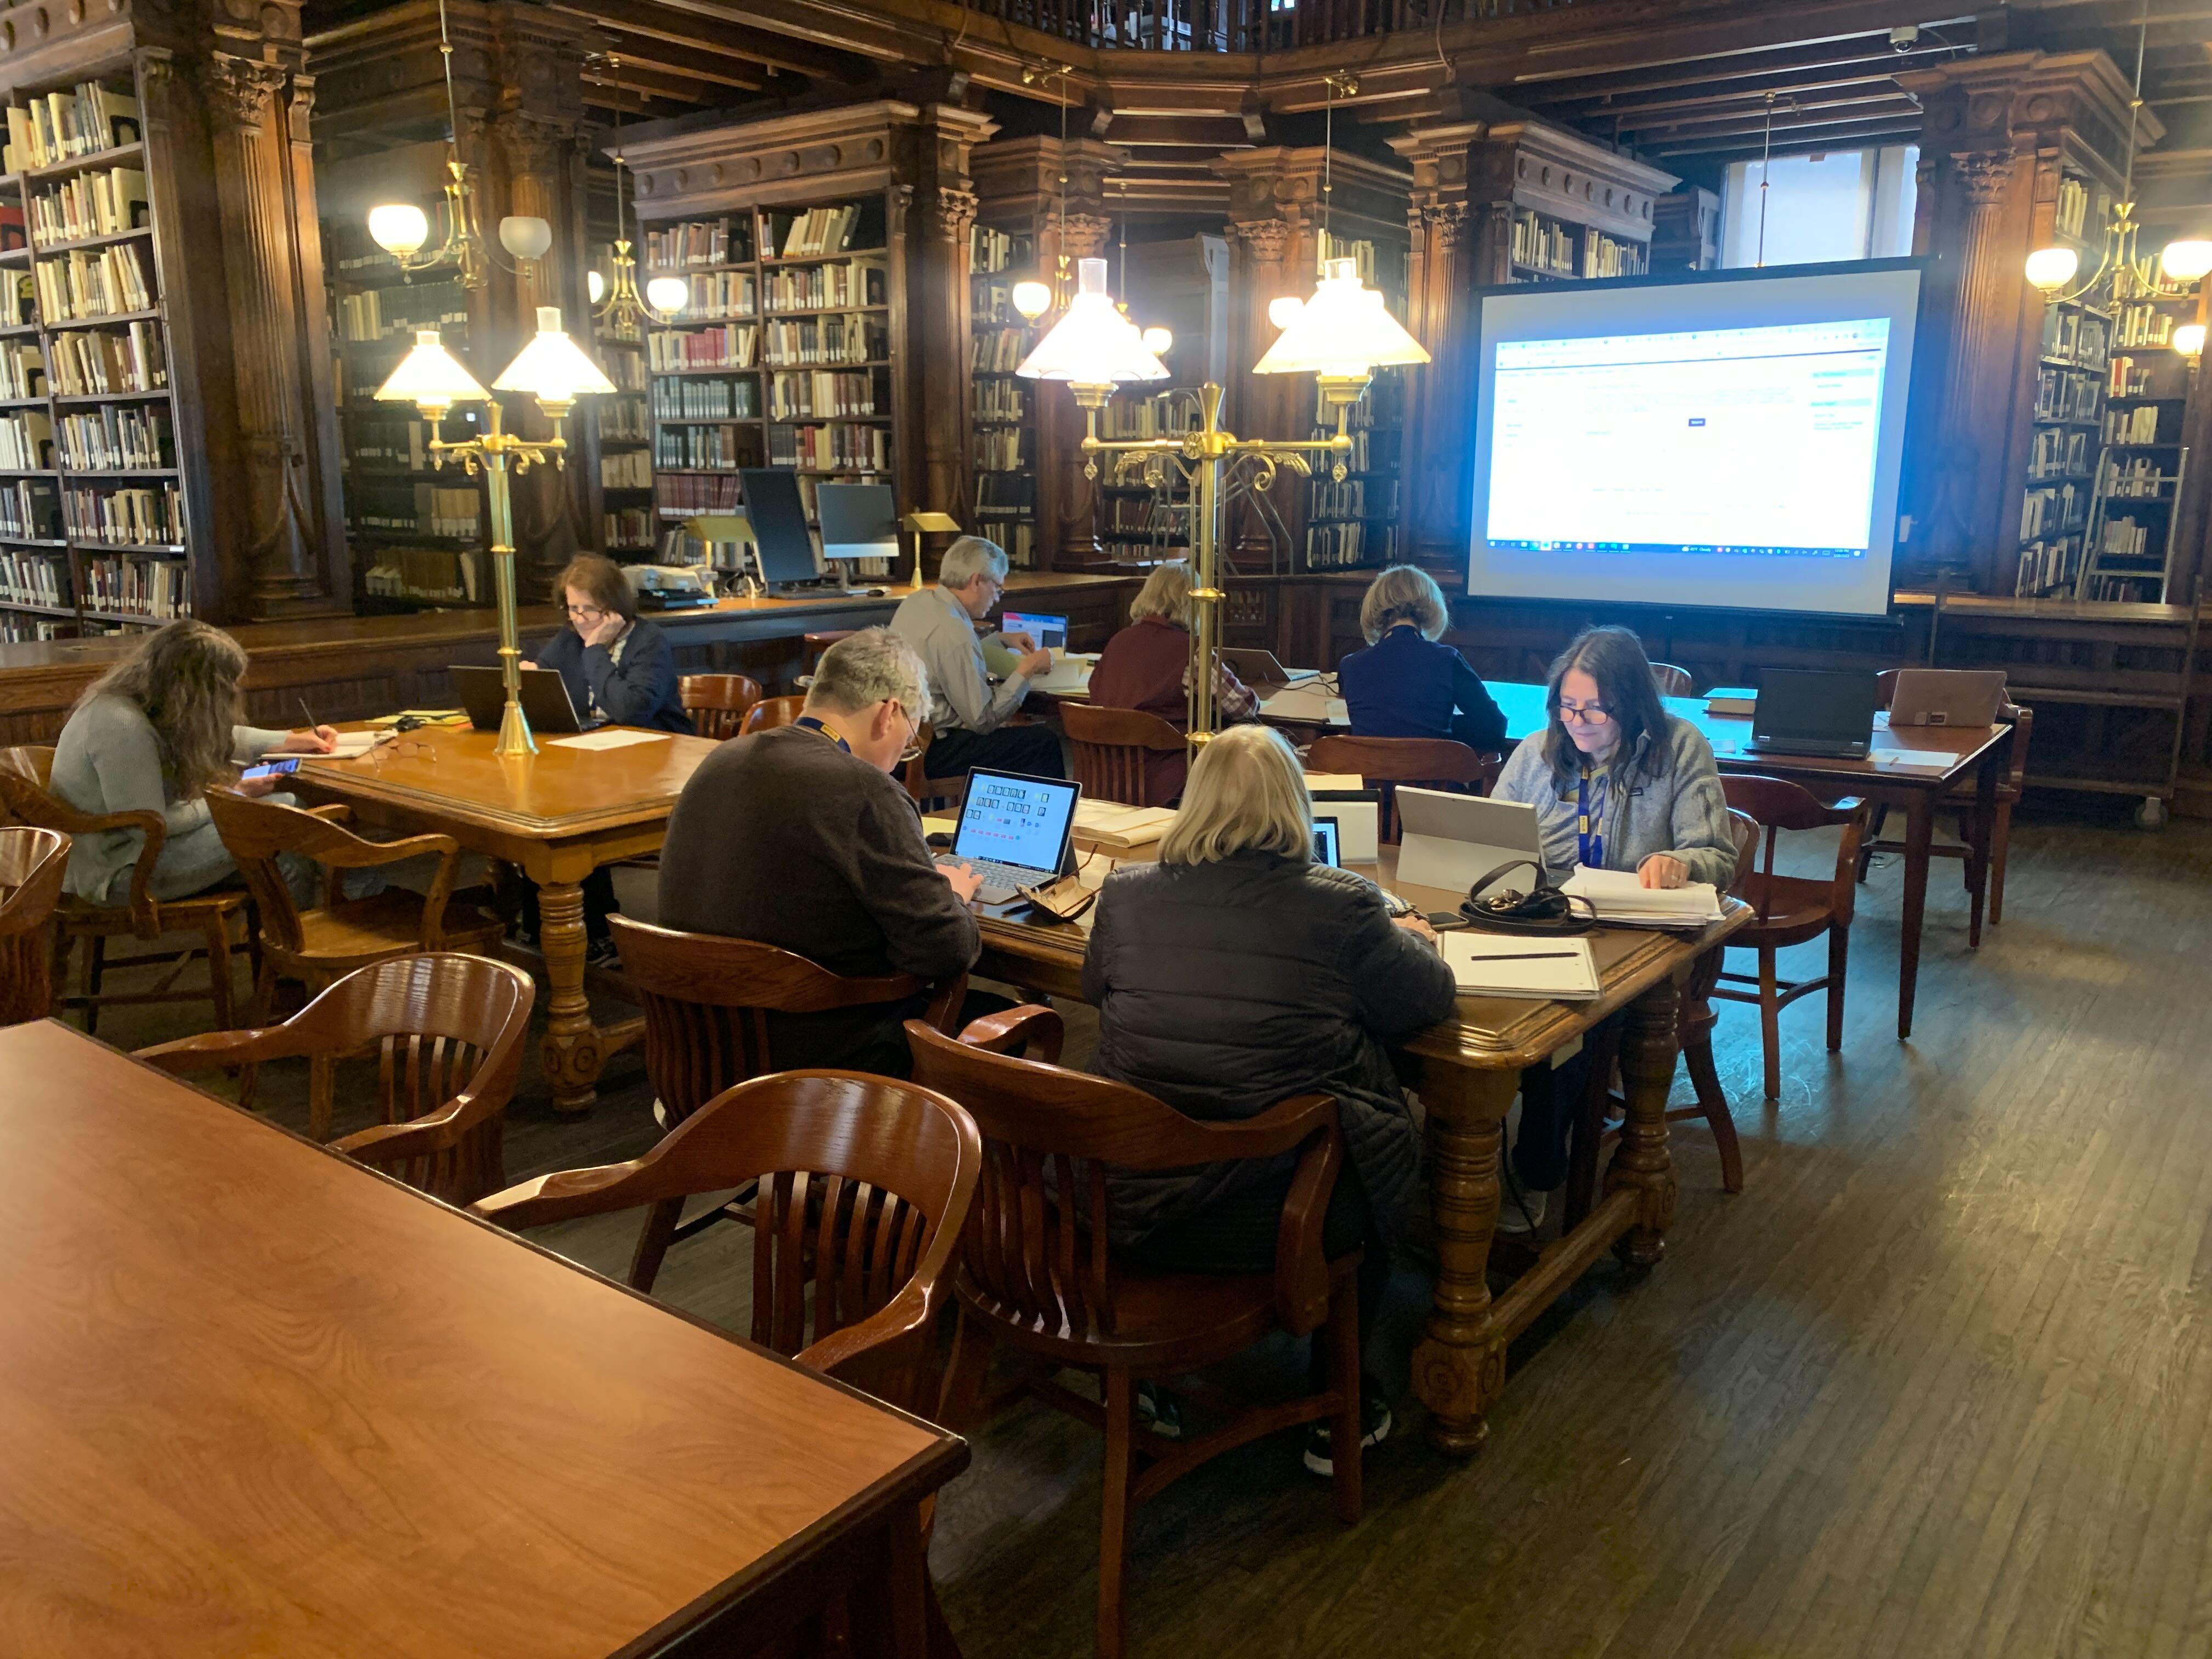 Researchers working in a library